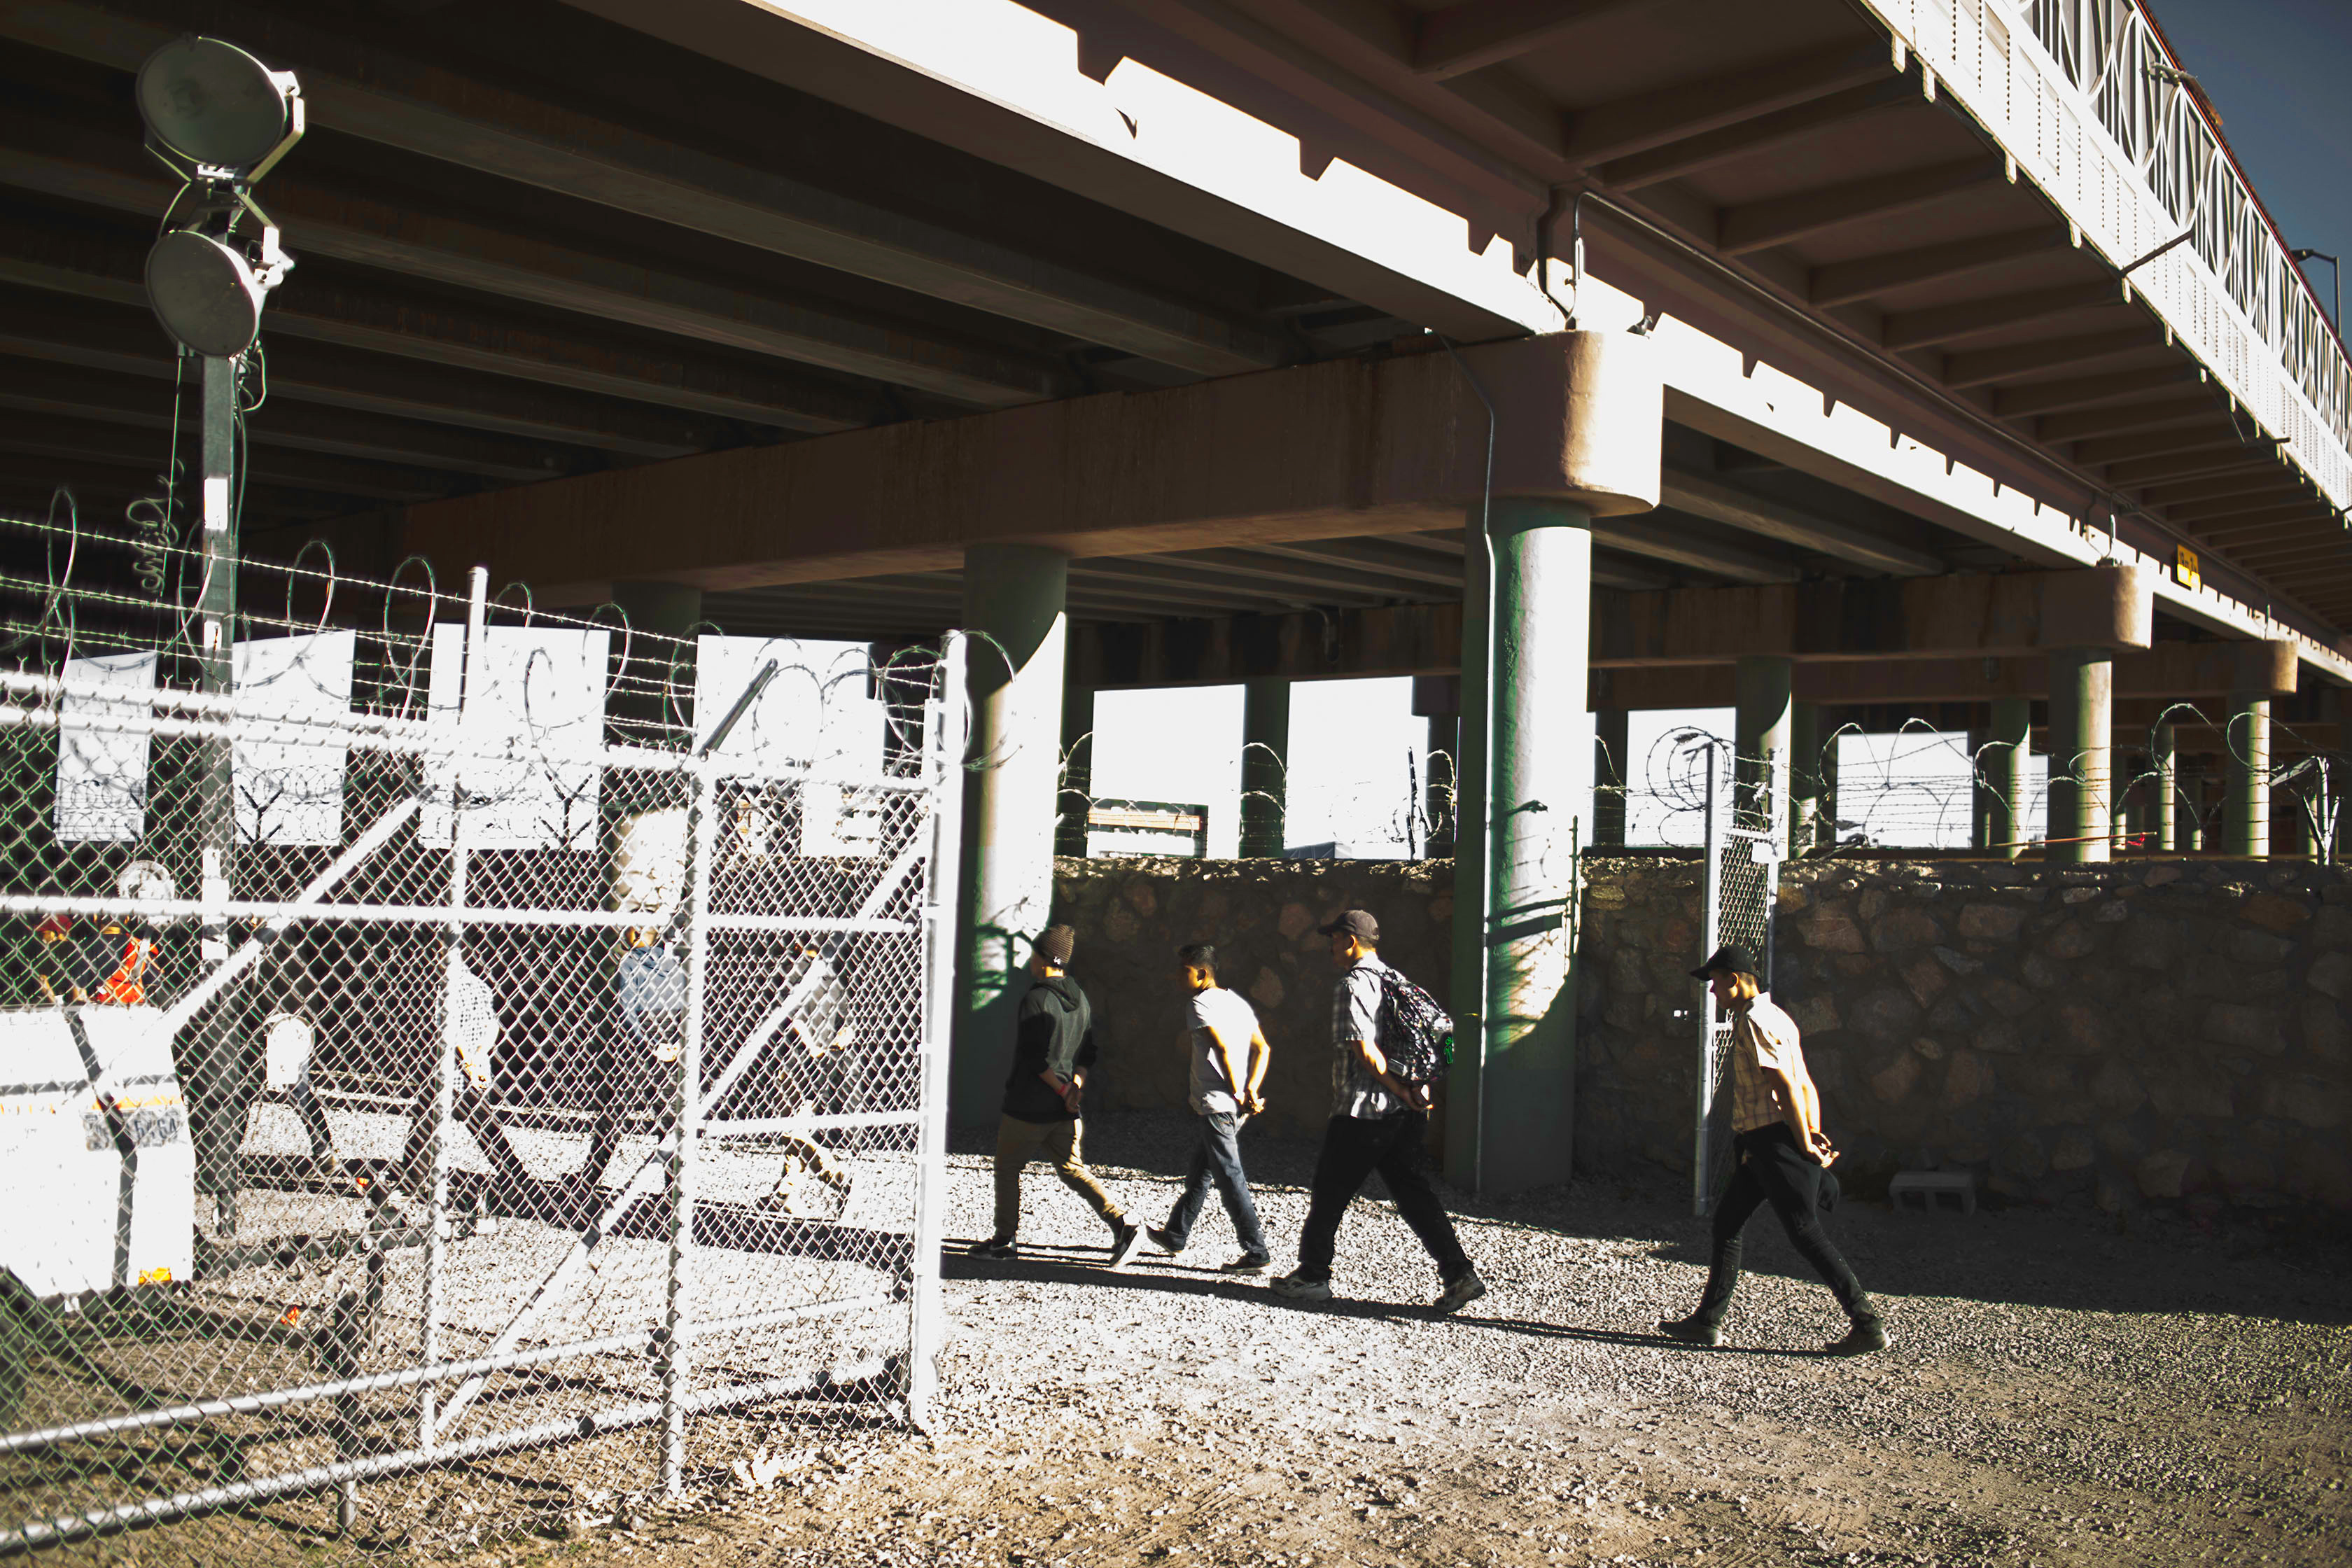 Migrants apprehended by the U.S. Customs and Border patrol are taken to a tent set up underneath the Paso Del Norte Bridge as they await processing in El Paso, Texas, on March 28, 2019. (Jared Moossy for TIME)